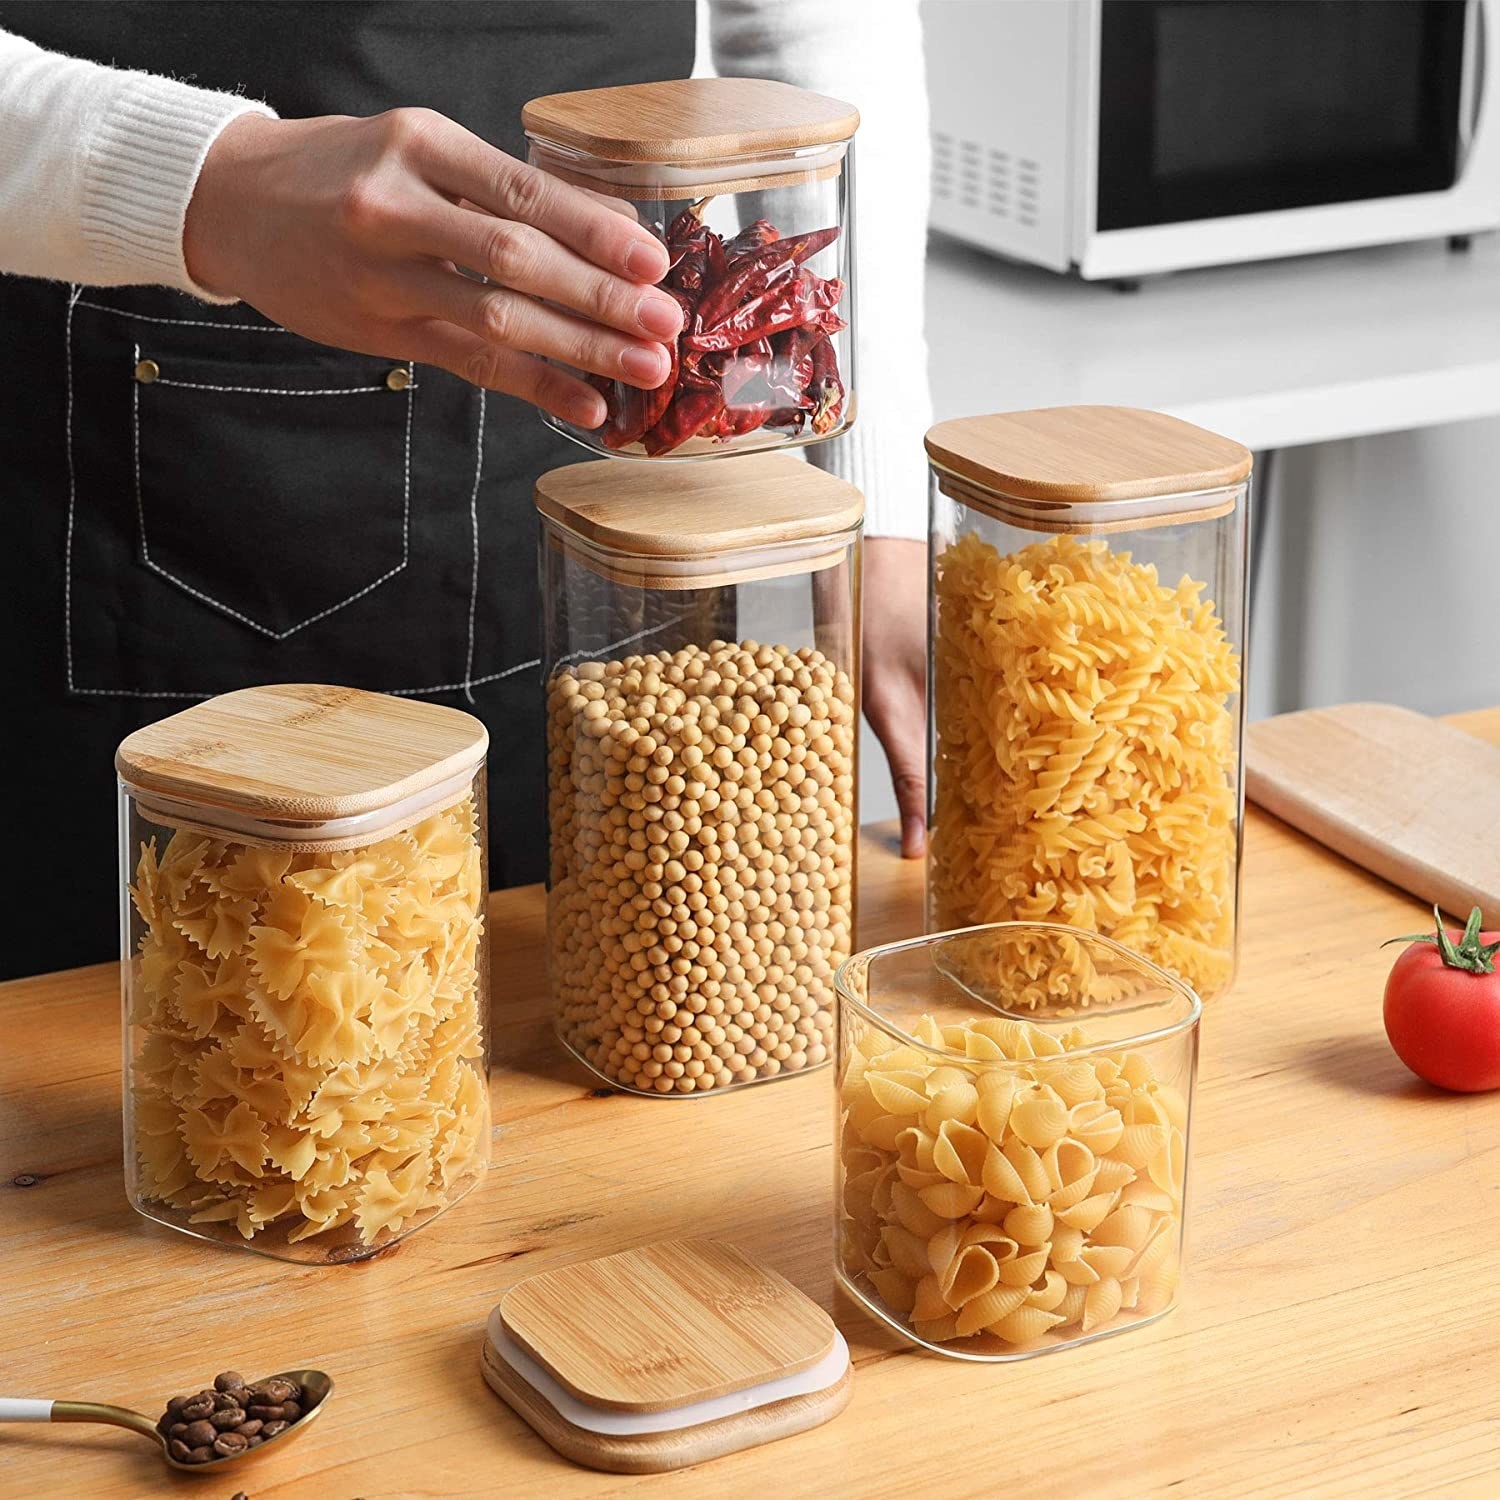 Several jars filled with pasta and grains on a counter